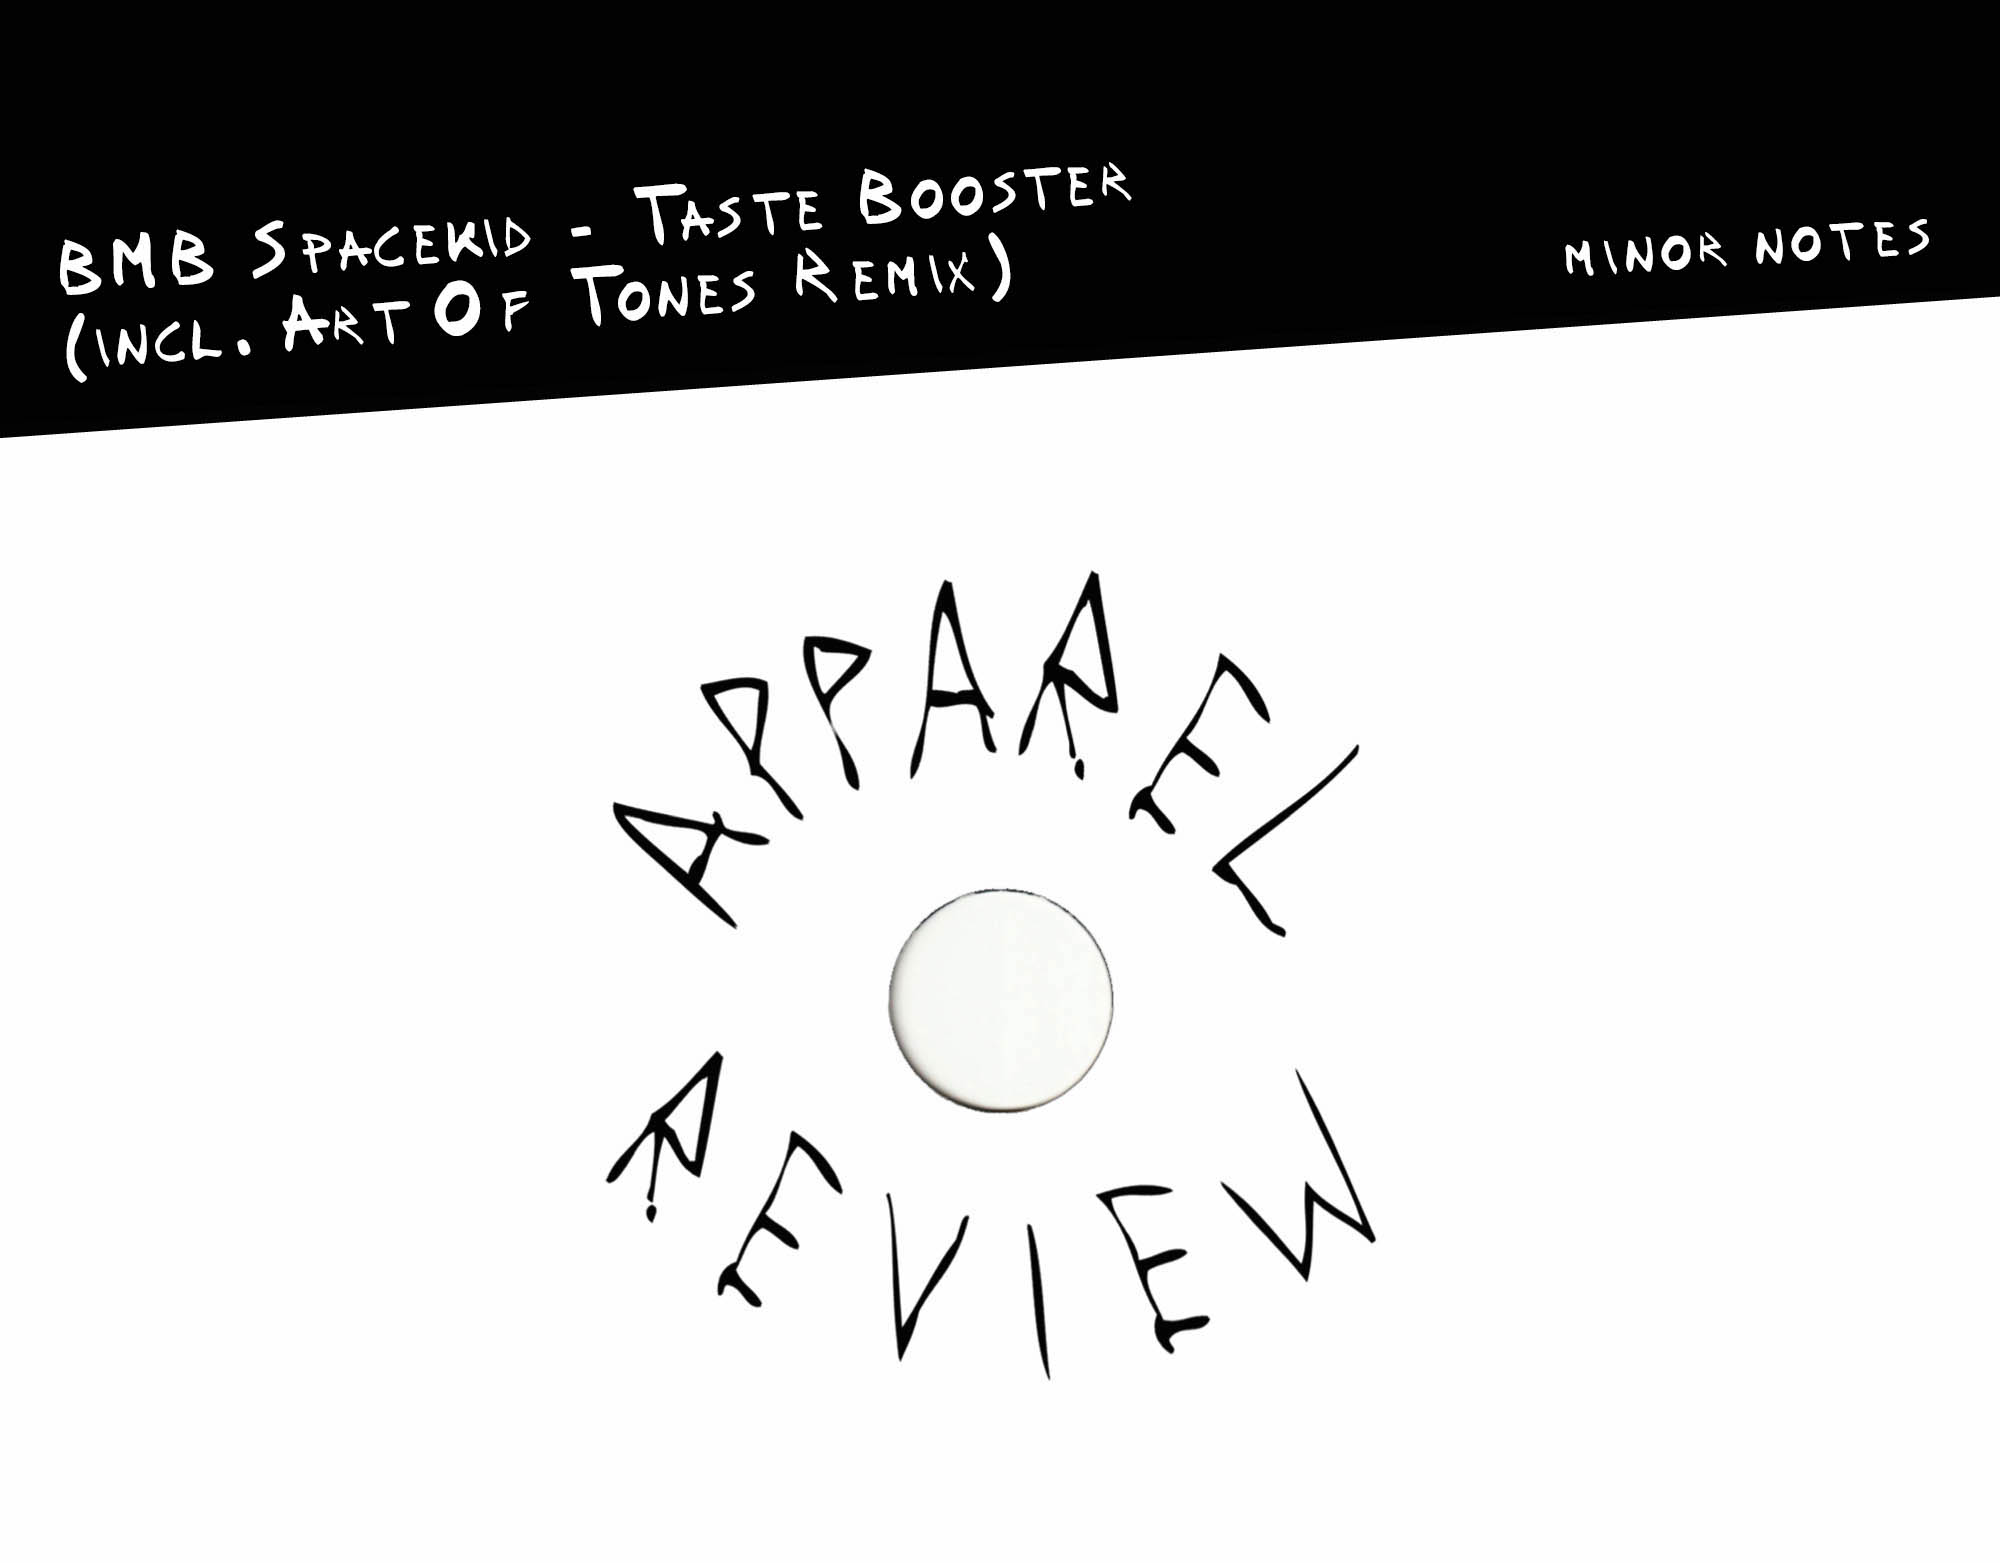 Apparel-Review BMB Spacekid – Taste Booster (incl. Art Of Tones Remix) (Minor Notes) LOW